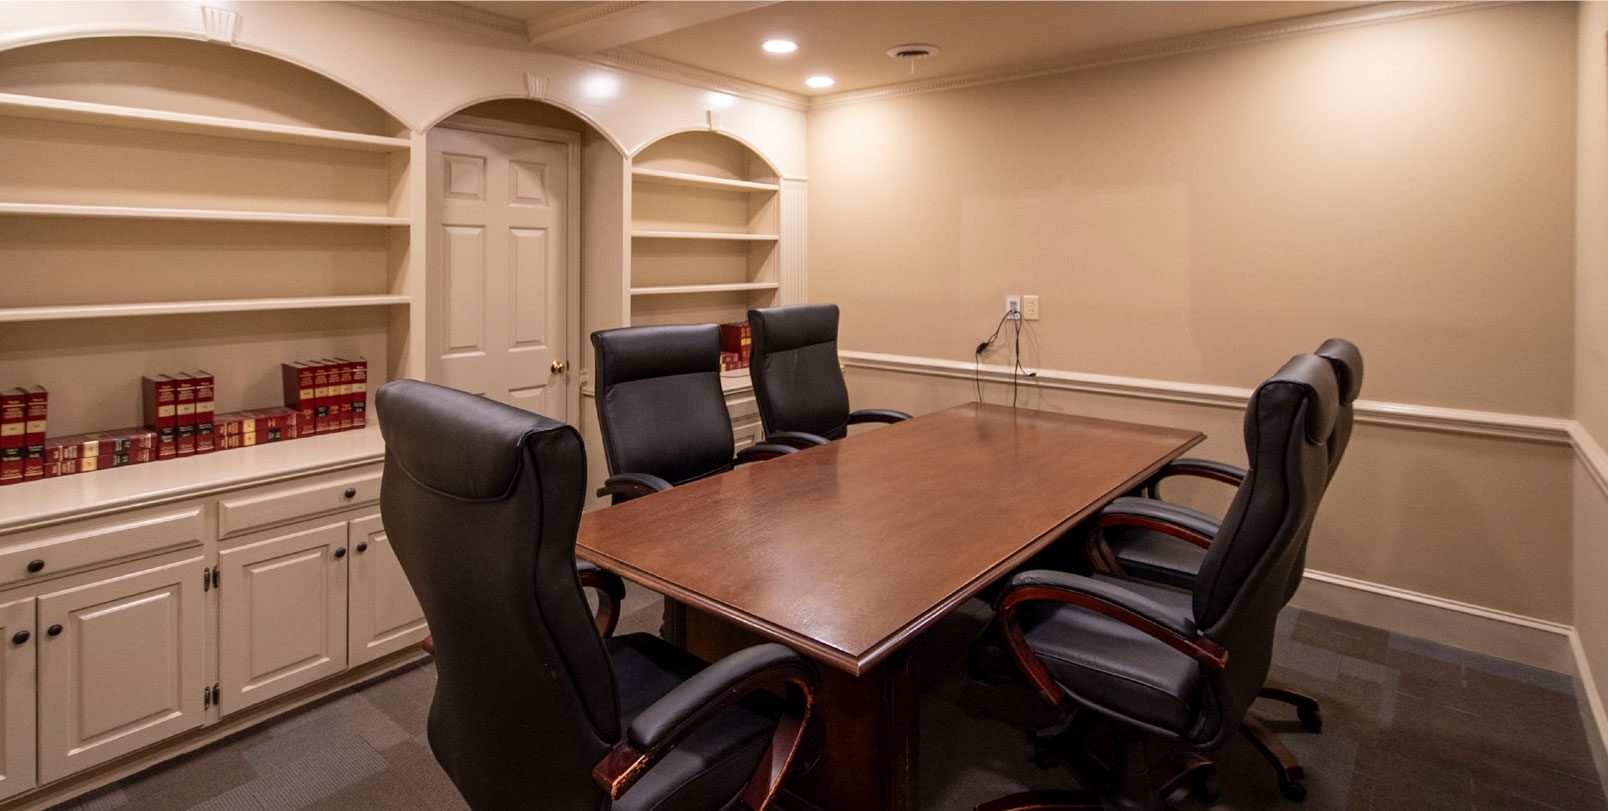 Conference room with chairs, table and cut outs in the wall